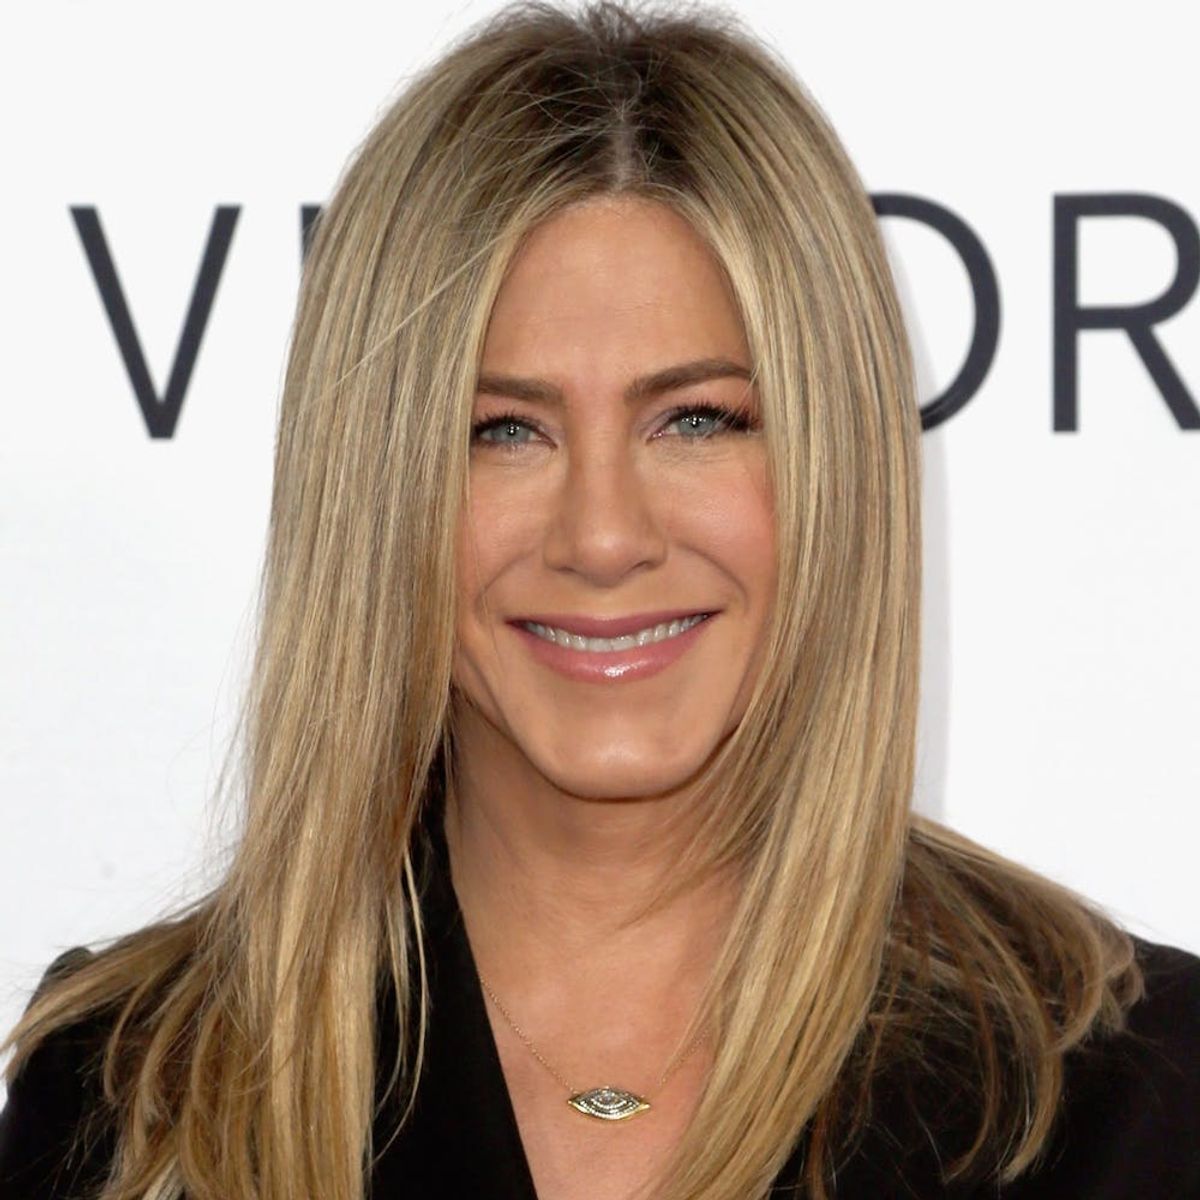 Here’s How You Can Work Out Like Jennifer Aniston